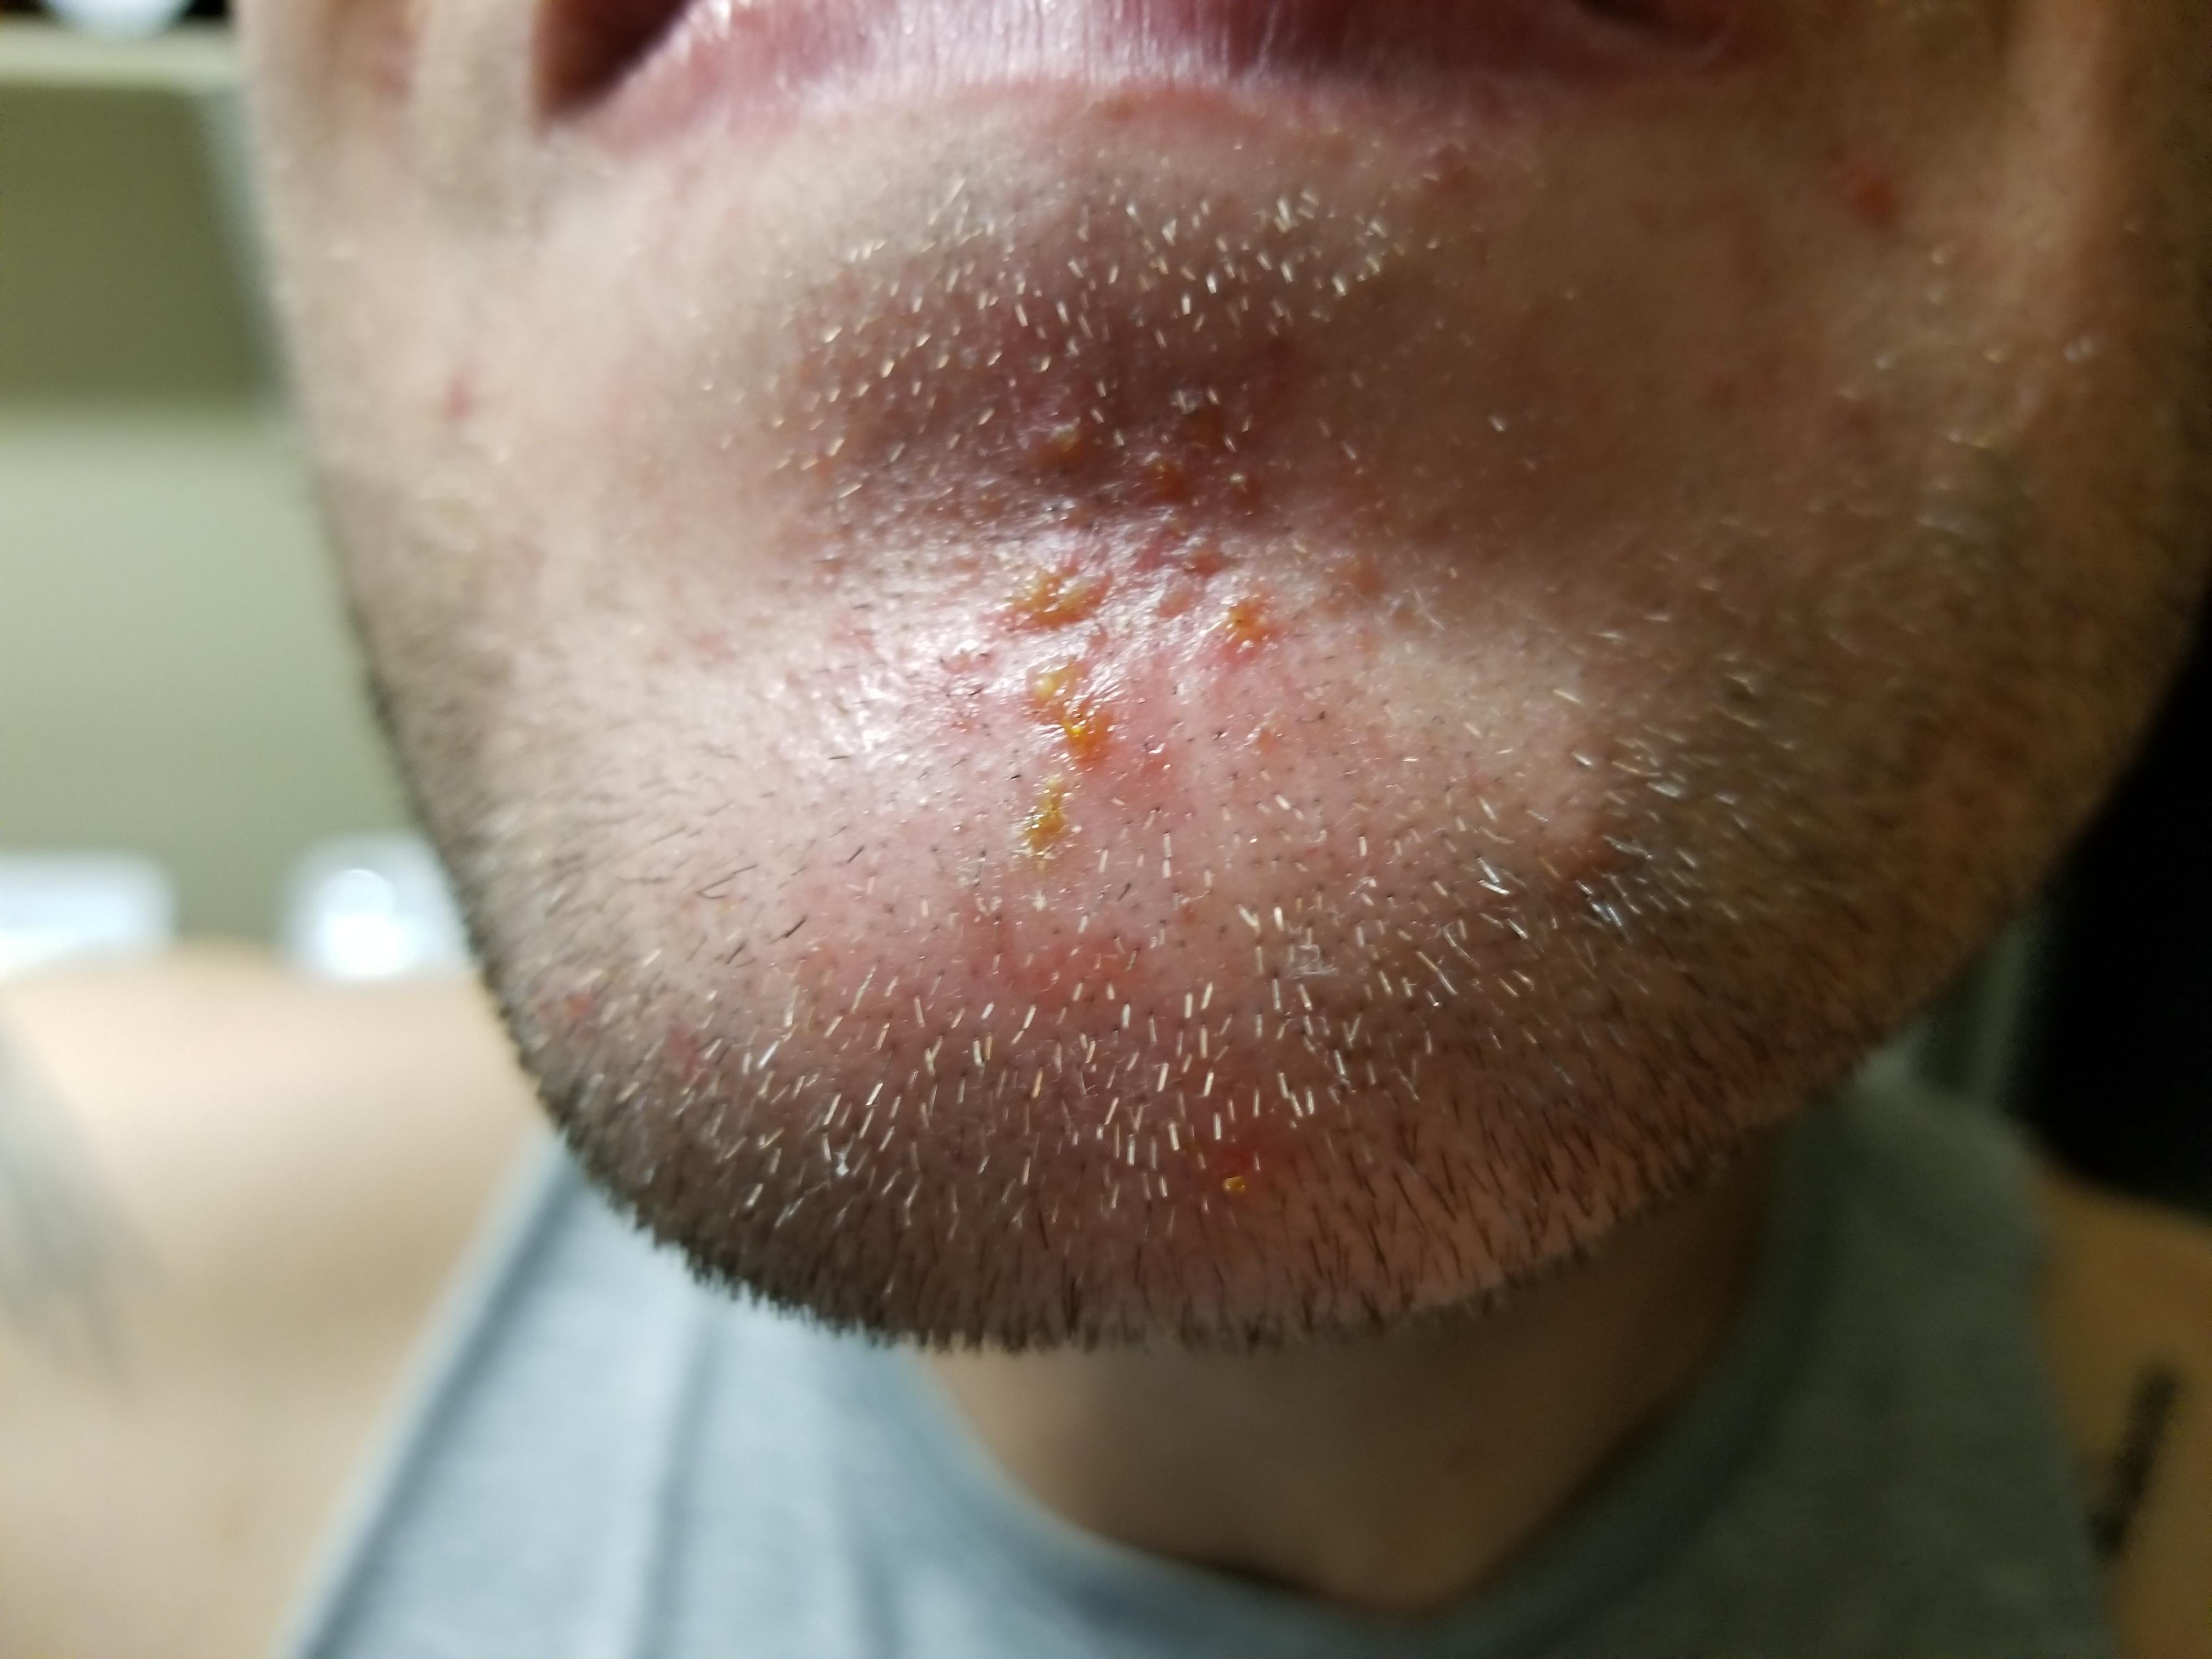 Folliculitis Or Acne On My Chin General Acne Discussion